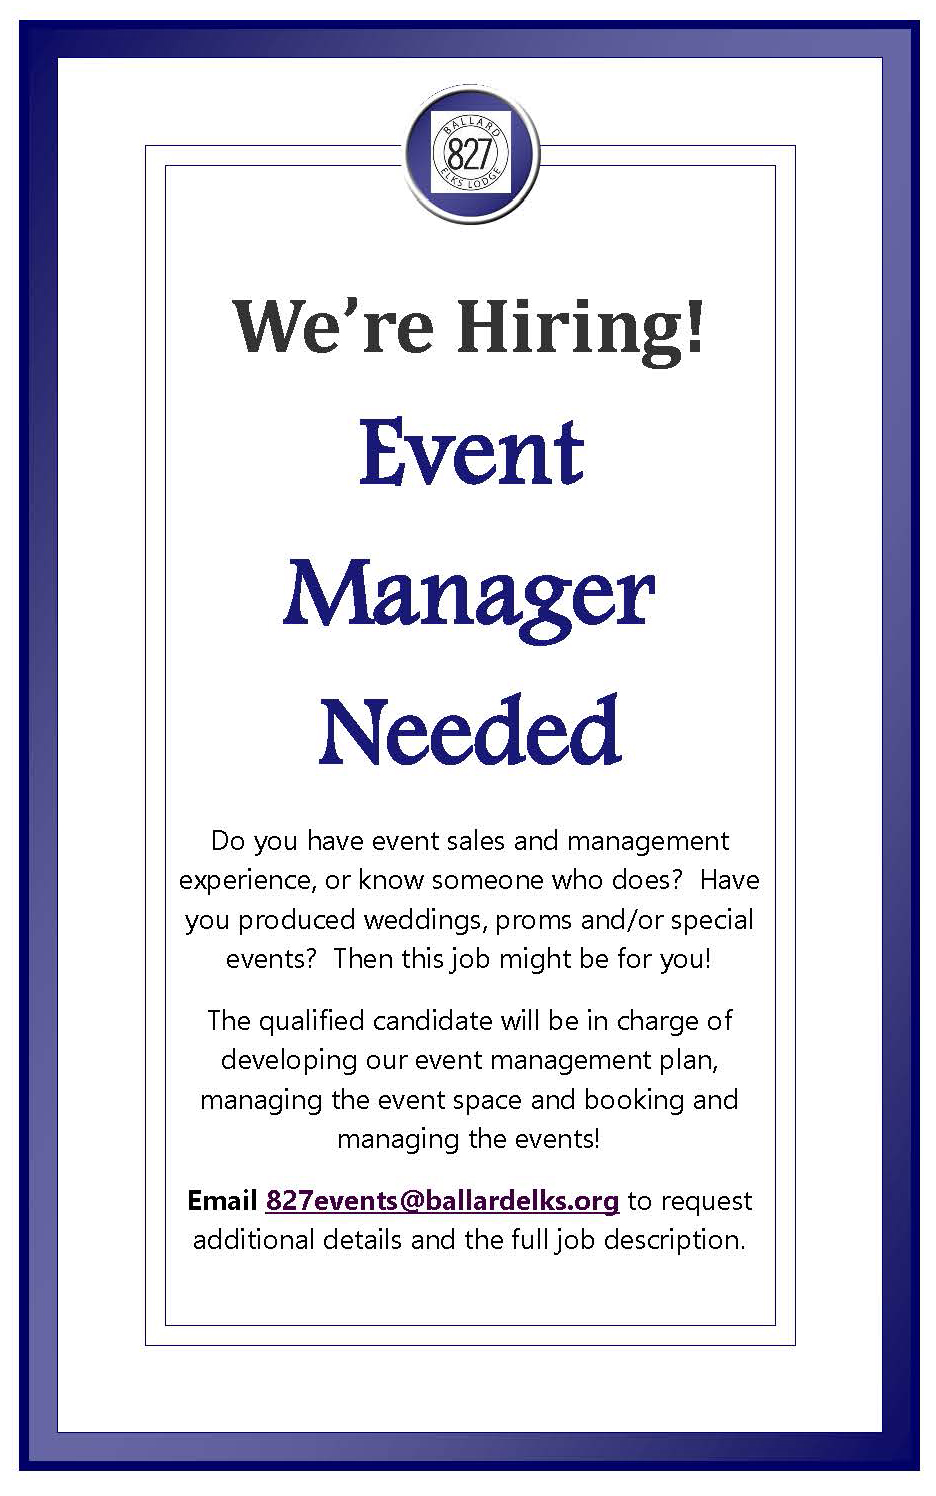 Events management jobs north west